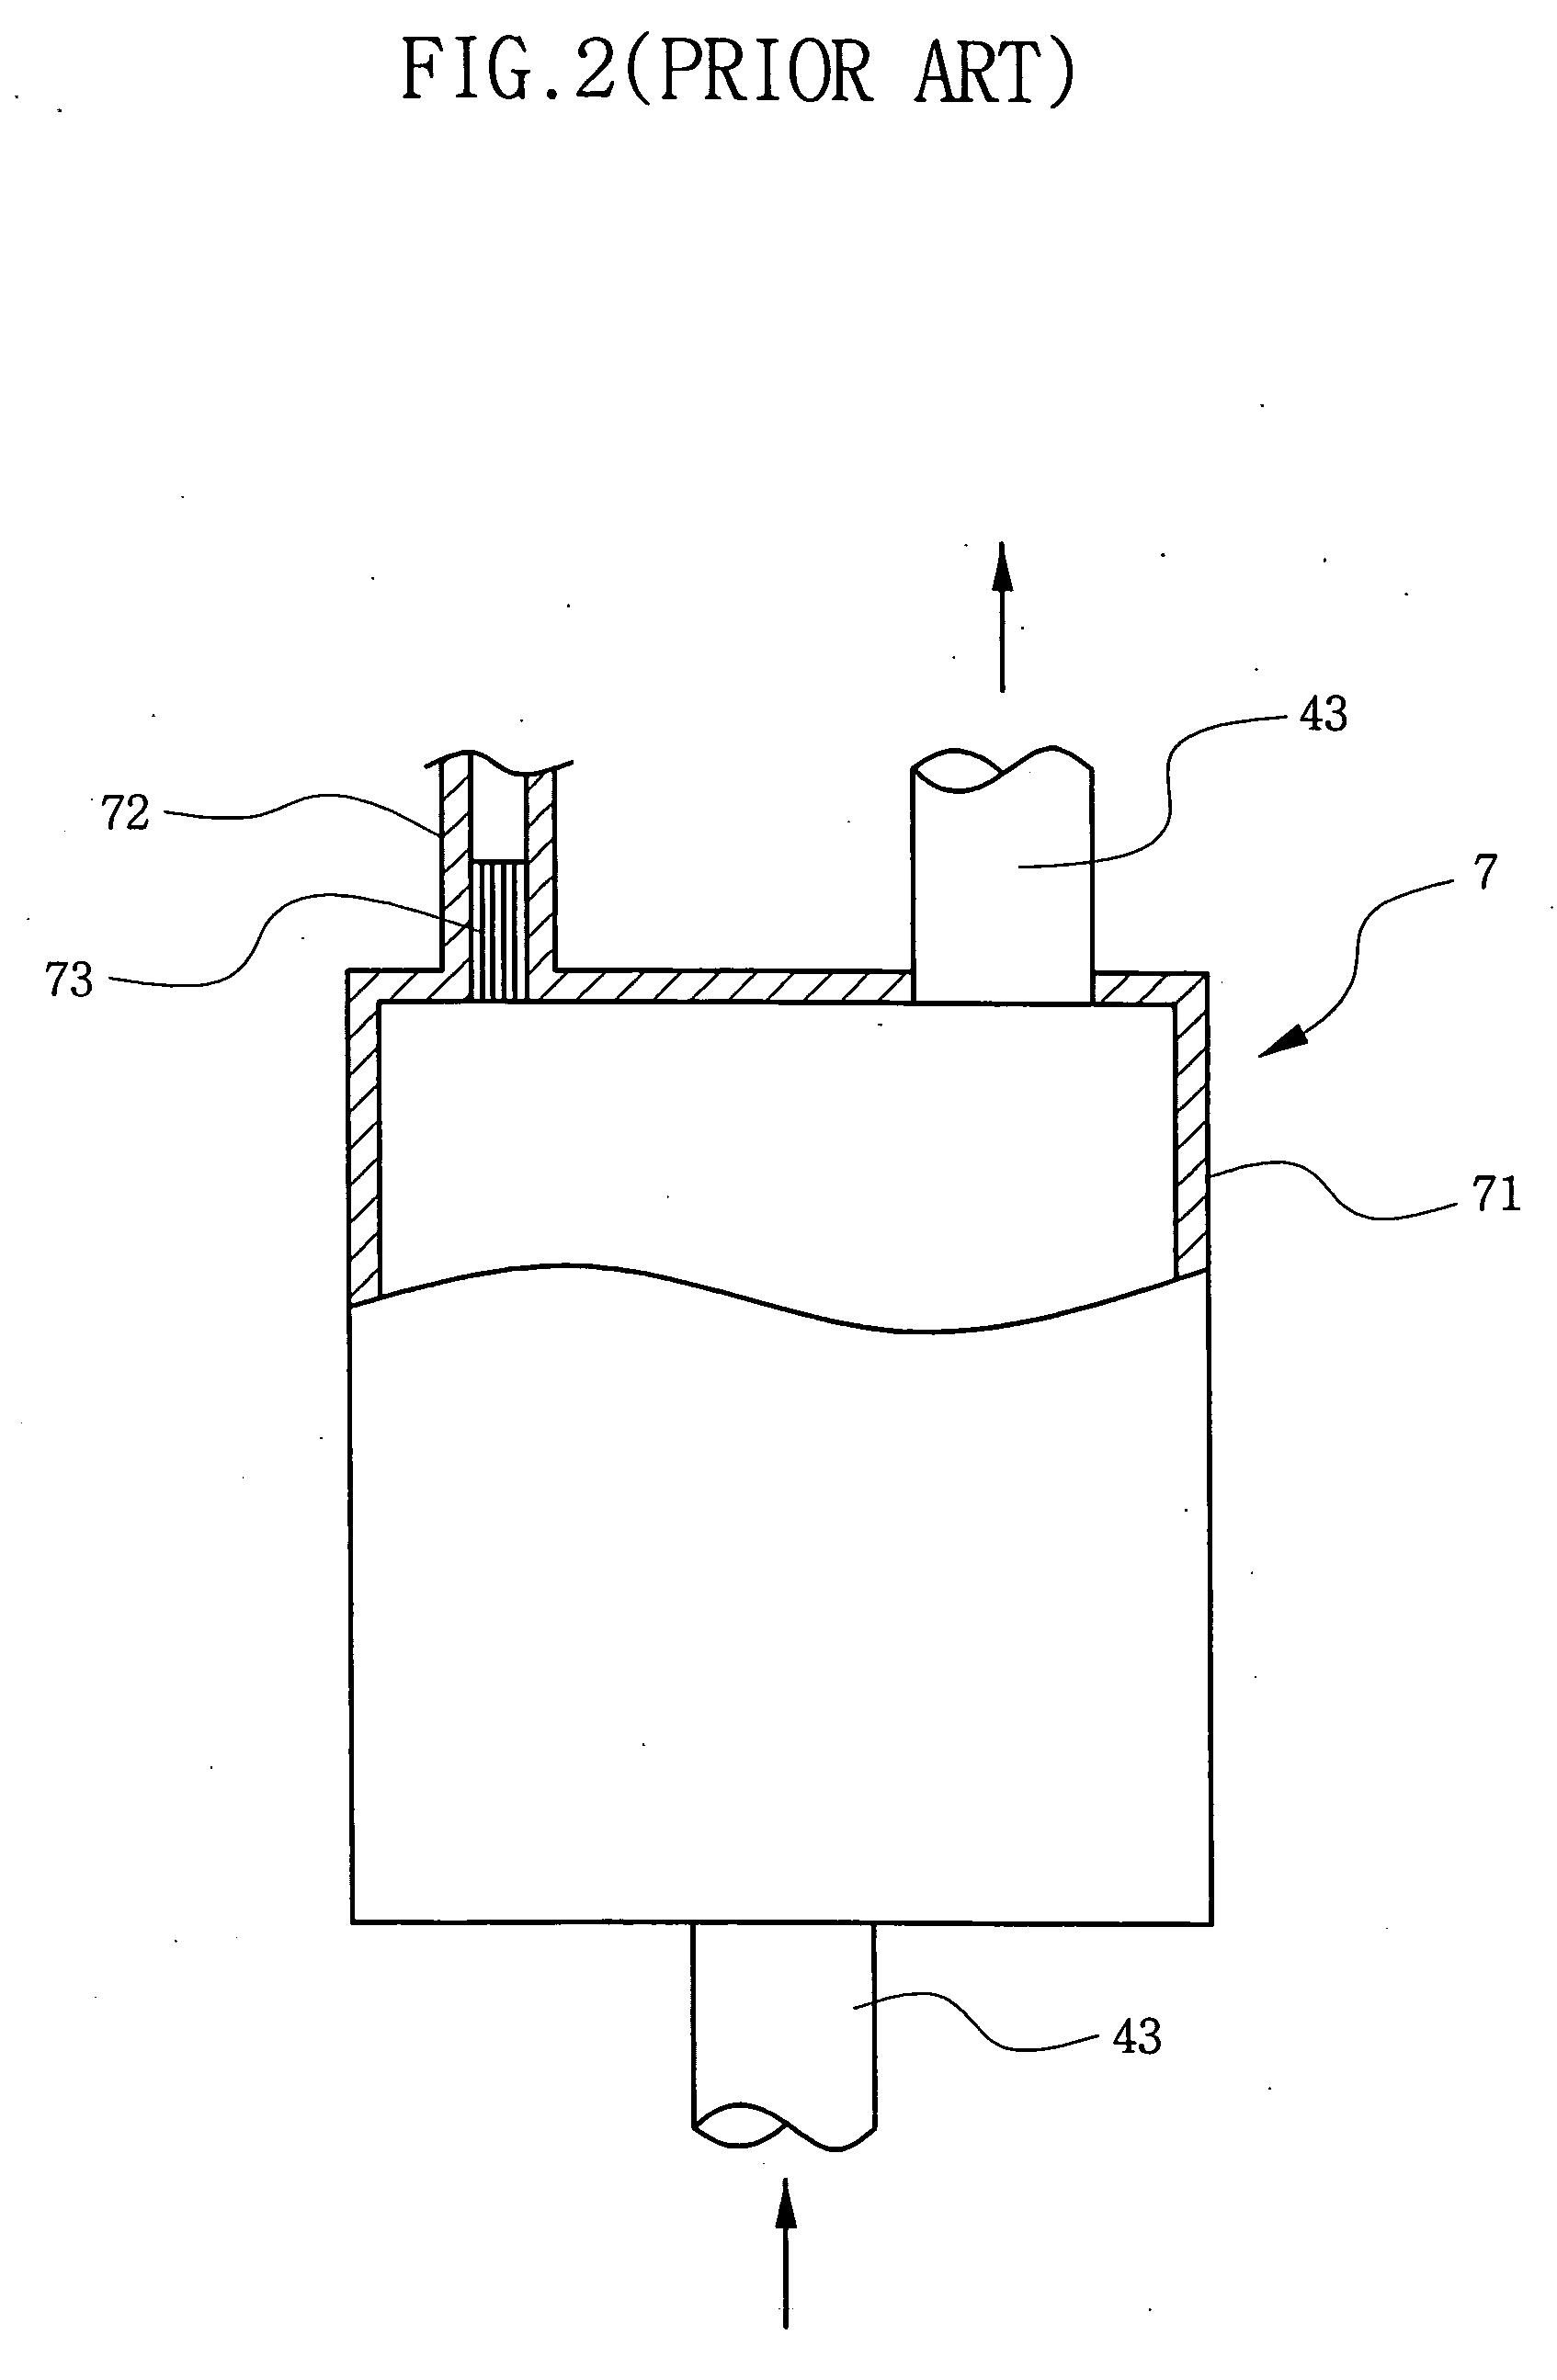 Apparatus for dispensing photo-resist in semiconductor device fabrication equipment